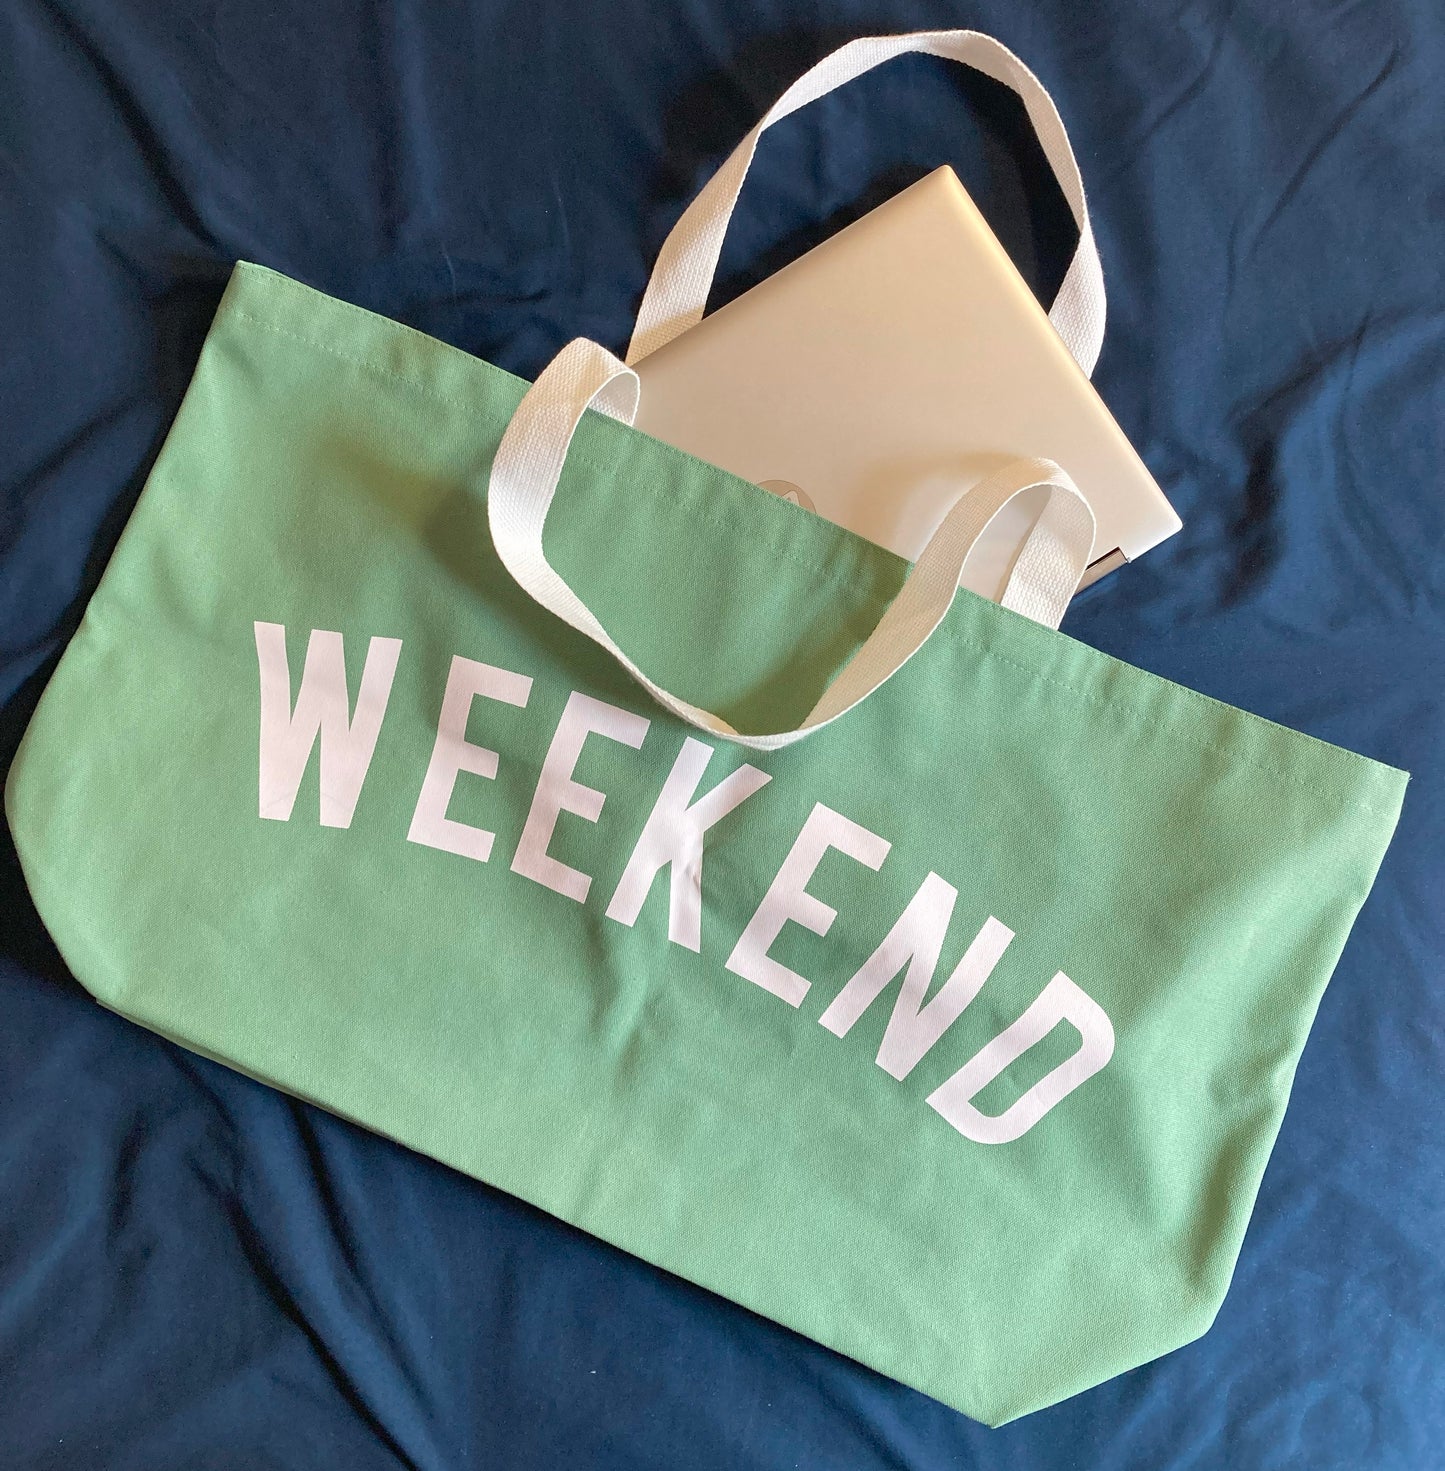 Extra Large Weekend Canvas Tote Bag - Pistachio Green (FREE SHIPPING)